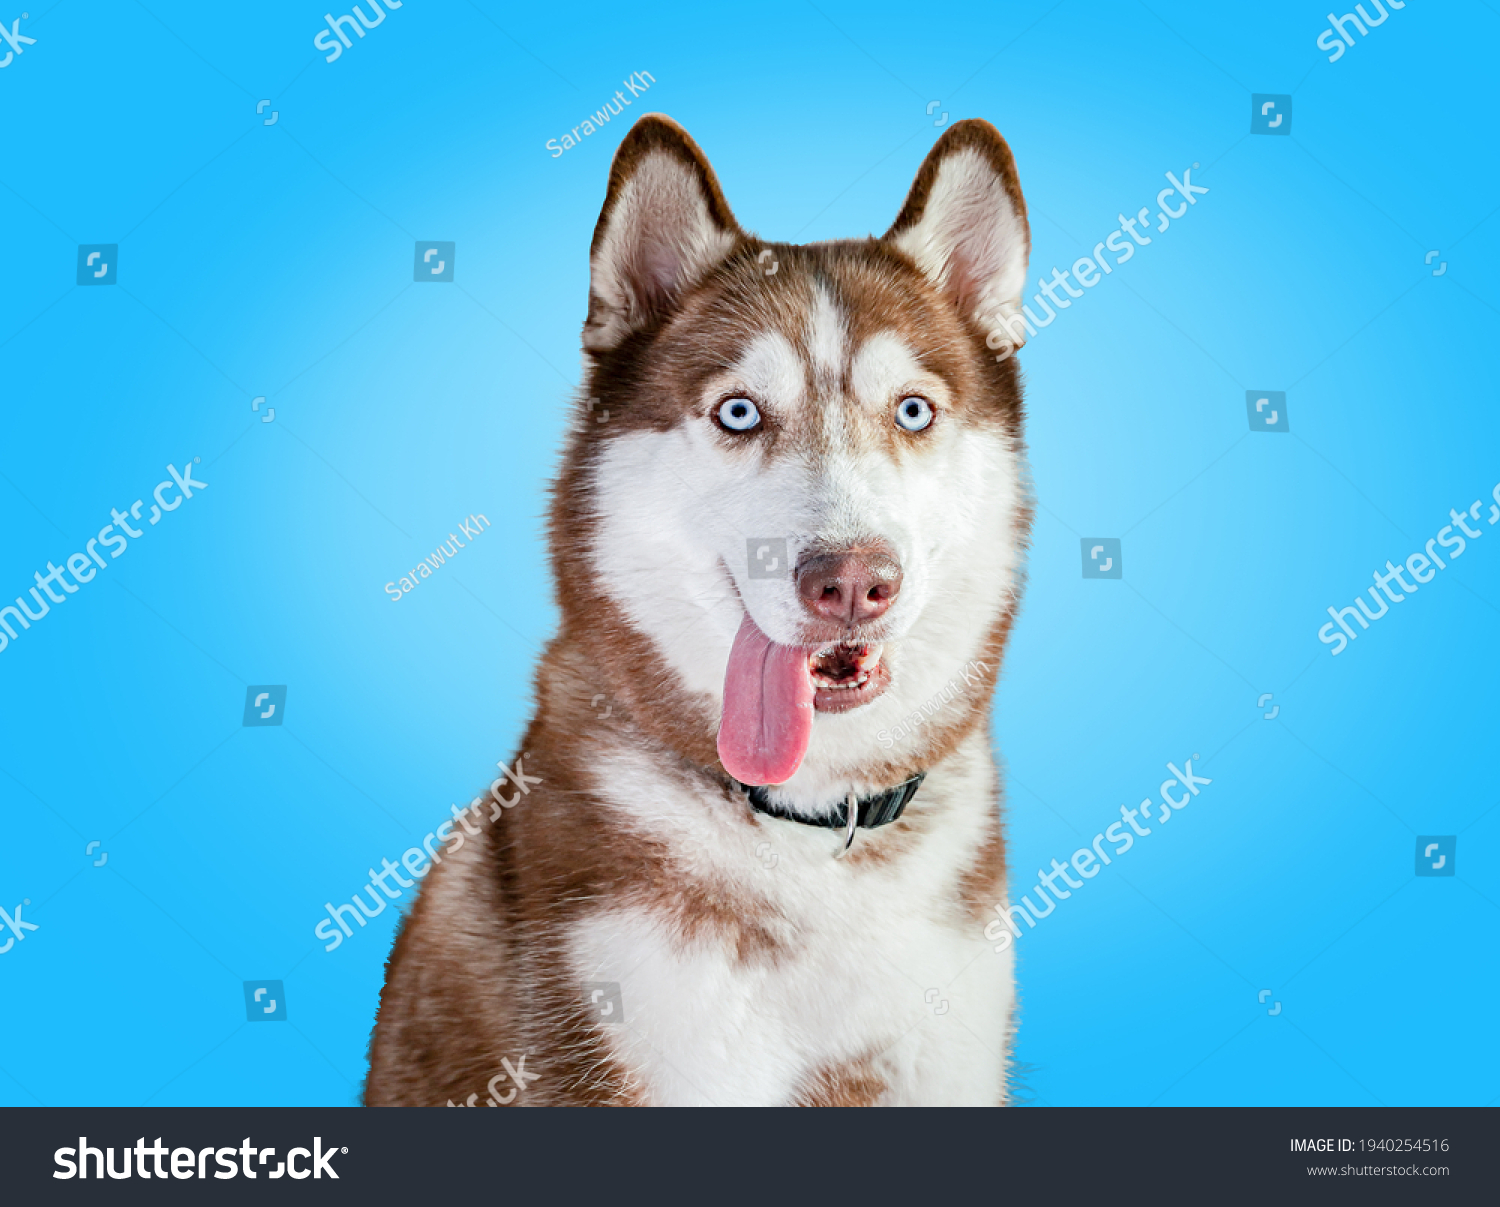 A purebred female Siberian Husky with a brown and white coat using di-cut technique on a blue background. Eyes looking forward, camera ears, protruding ears, tongue and collar, and pet care ideas. #1940254516